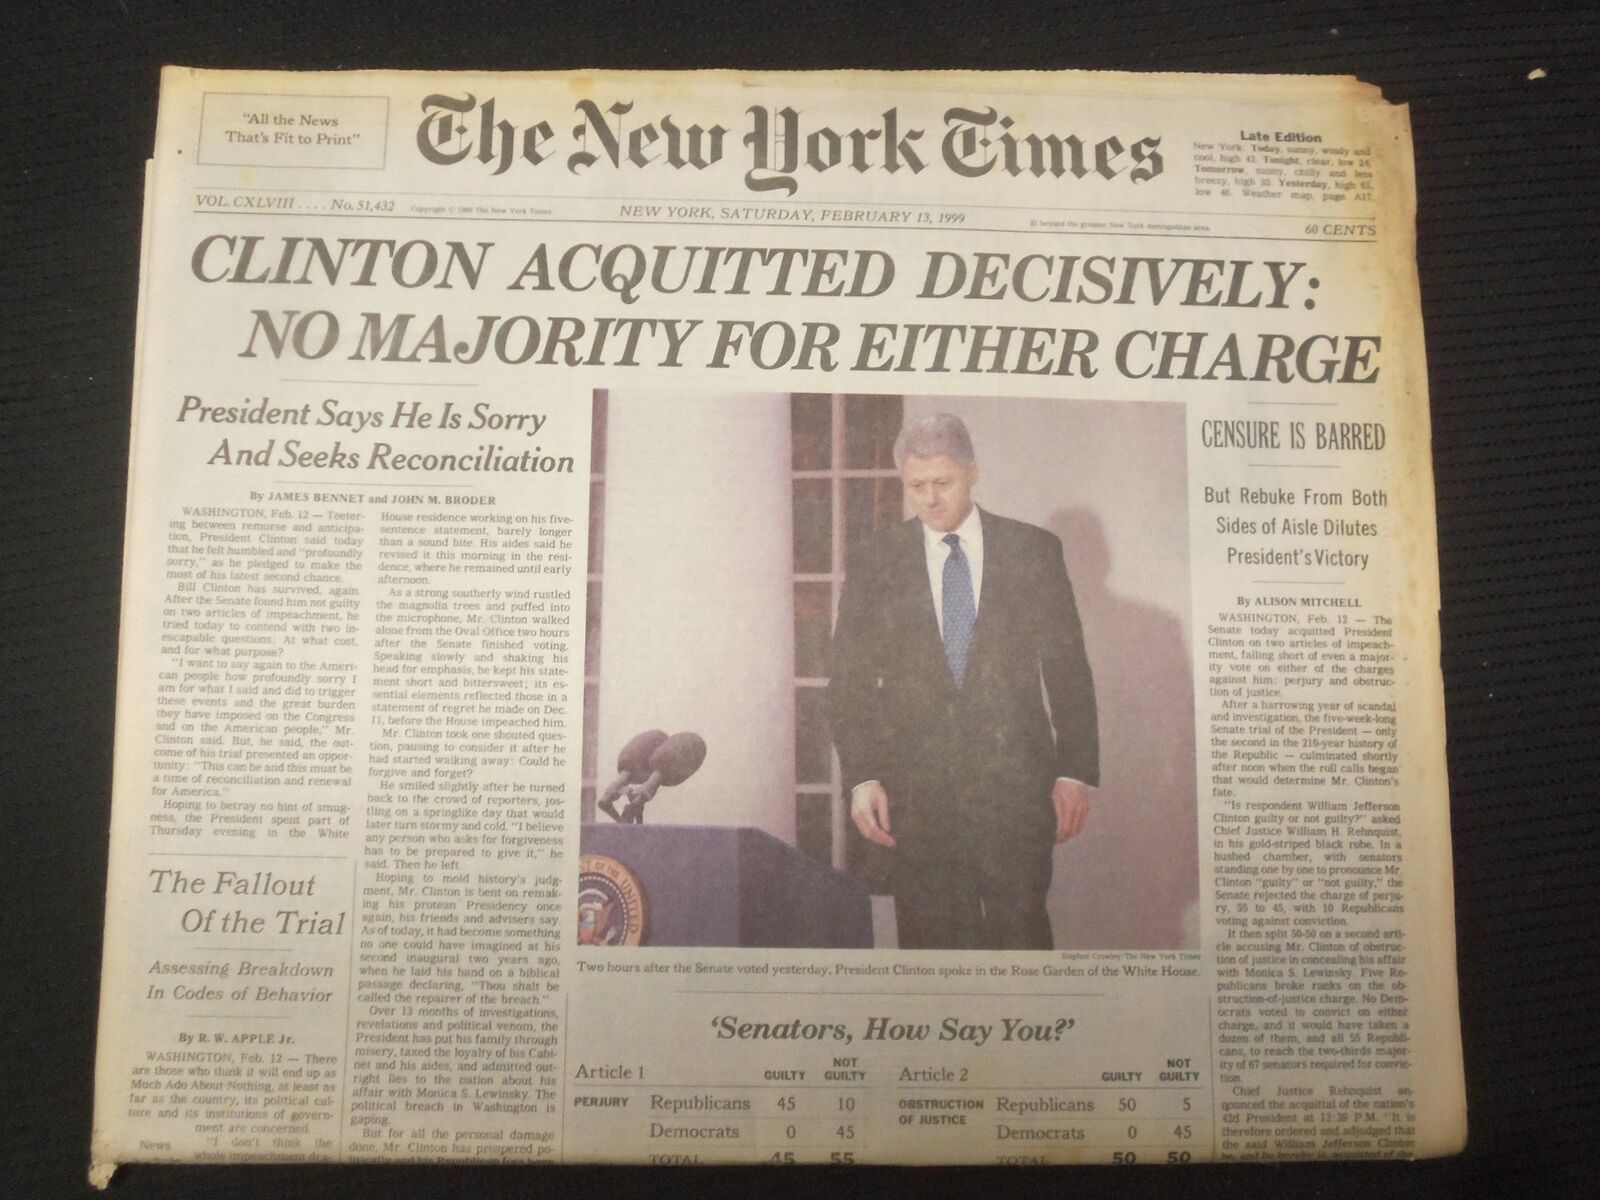 1999 FEB 13 NEW YORK TIMES NEWSPAPER - CLINTON ACQUITTED DECISIVELY - NP 6969